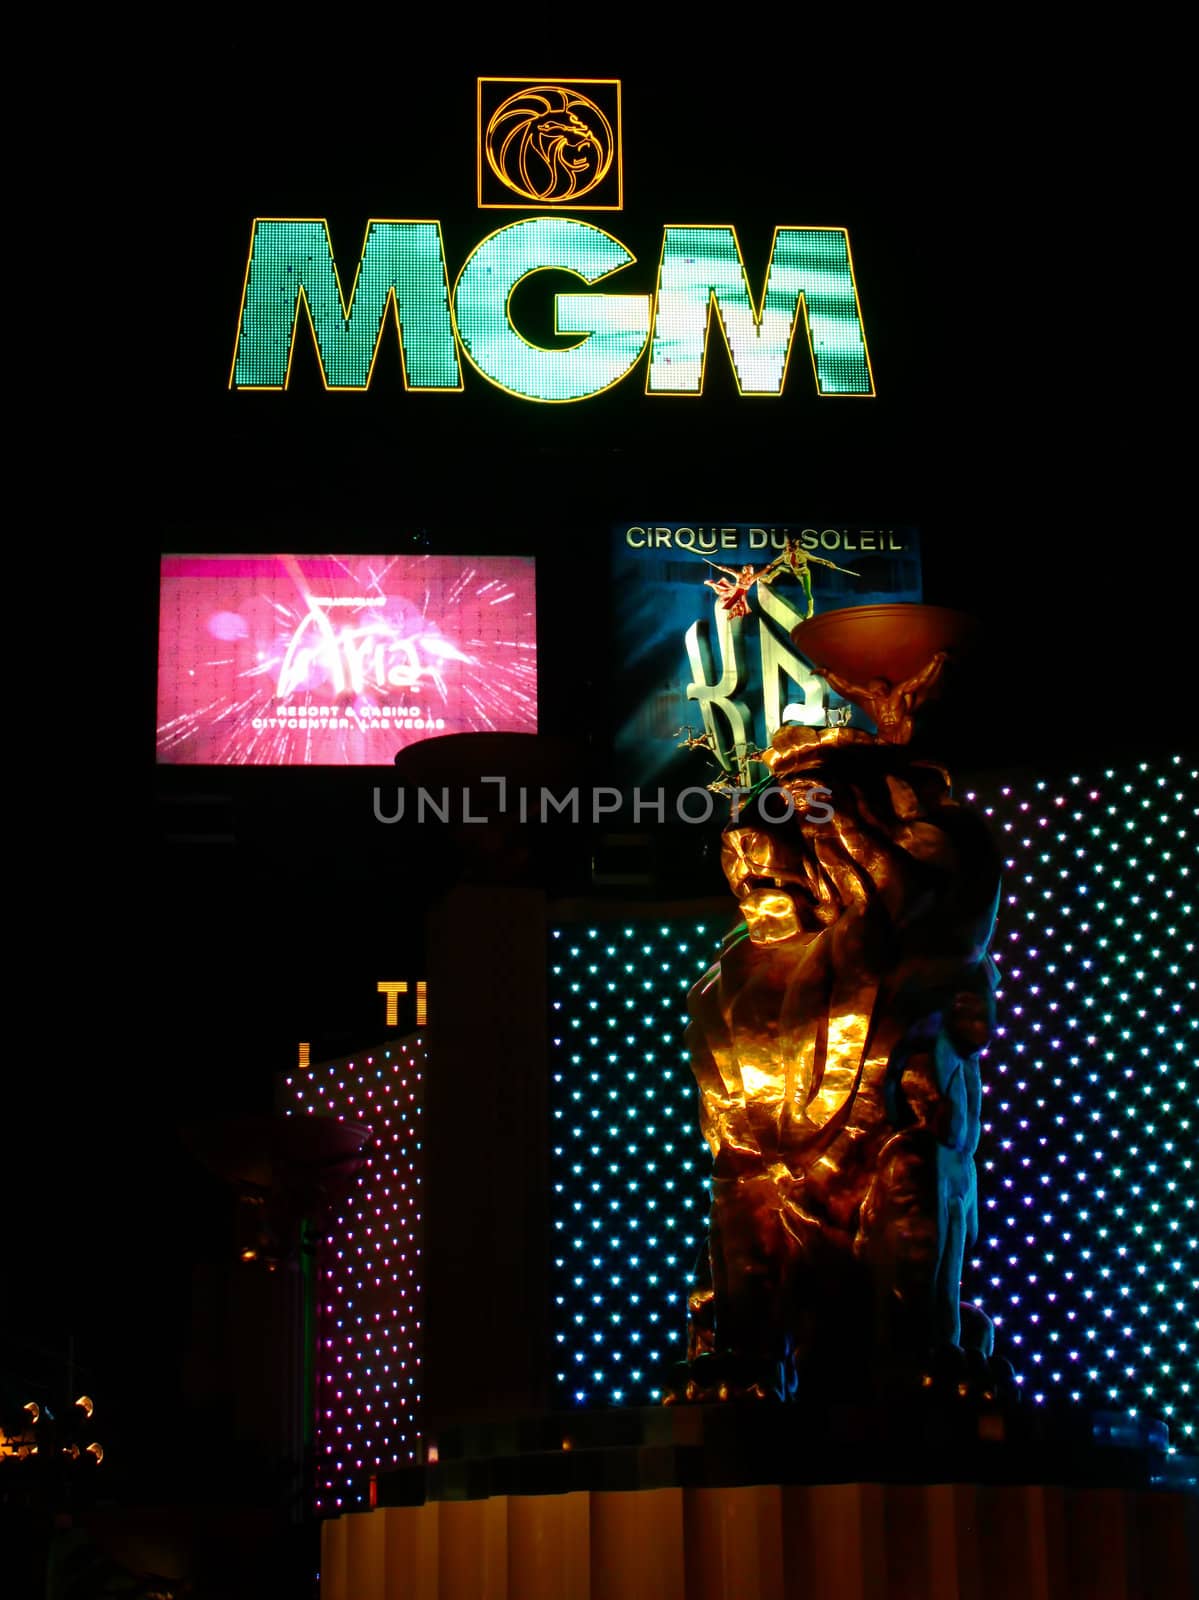 Las Vegas, USA - October 29, 2011: The MGM Grand Las Vegas is one of the largest hotels in the world.  The main sign on Las Vegas Boulevard and the bronze Leo the Lion statue are seen here.